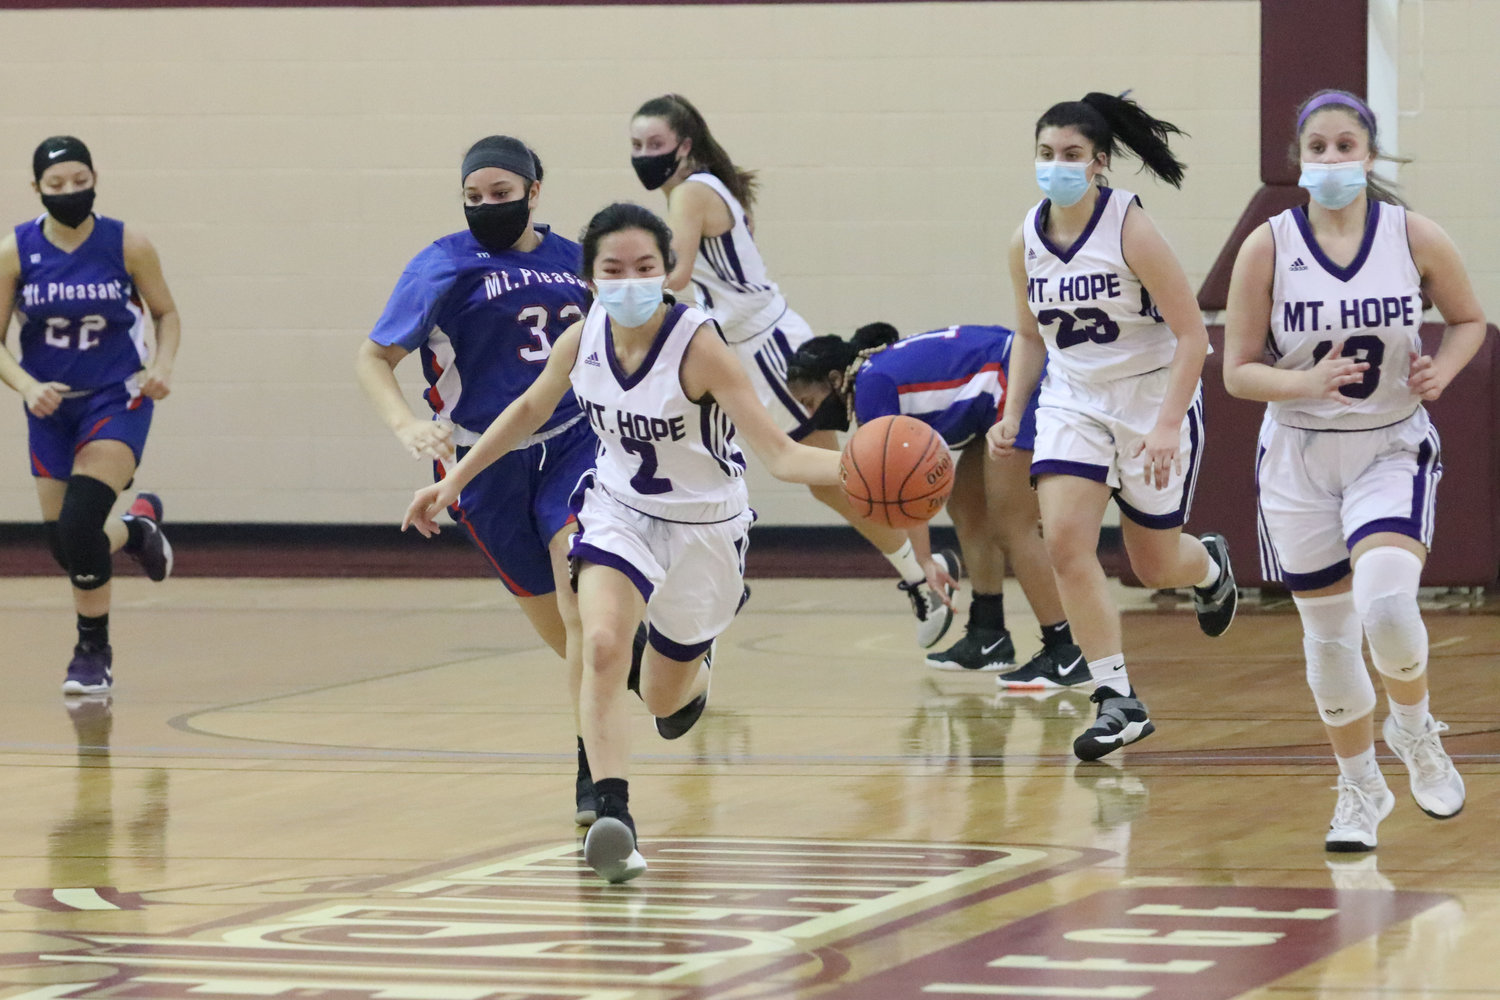 Elsa White (left) heads up court on a fast break after making a steal, with teammates Reyn Ferris, Aeryal Rodrigues and Abby Razzino.